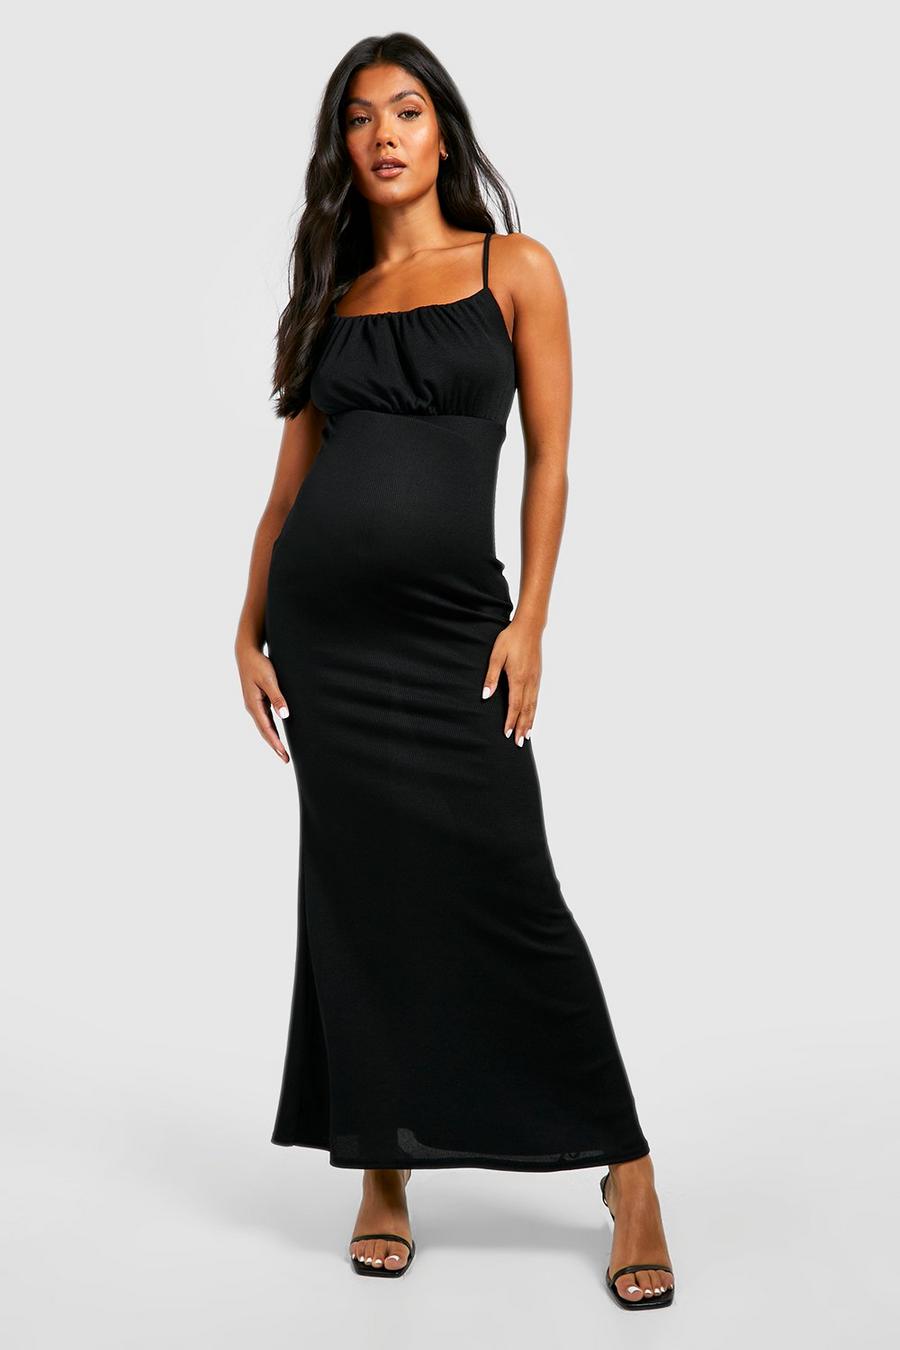 Black Maternity Ruched Bust Strappy Maxi Dress